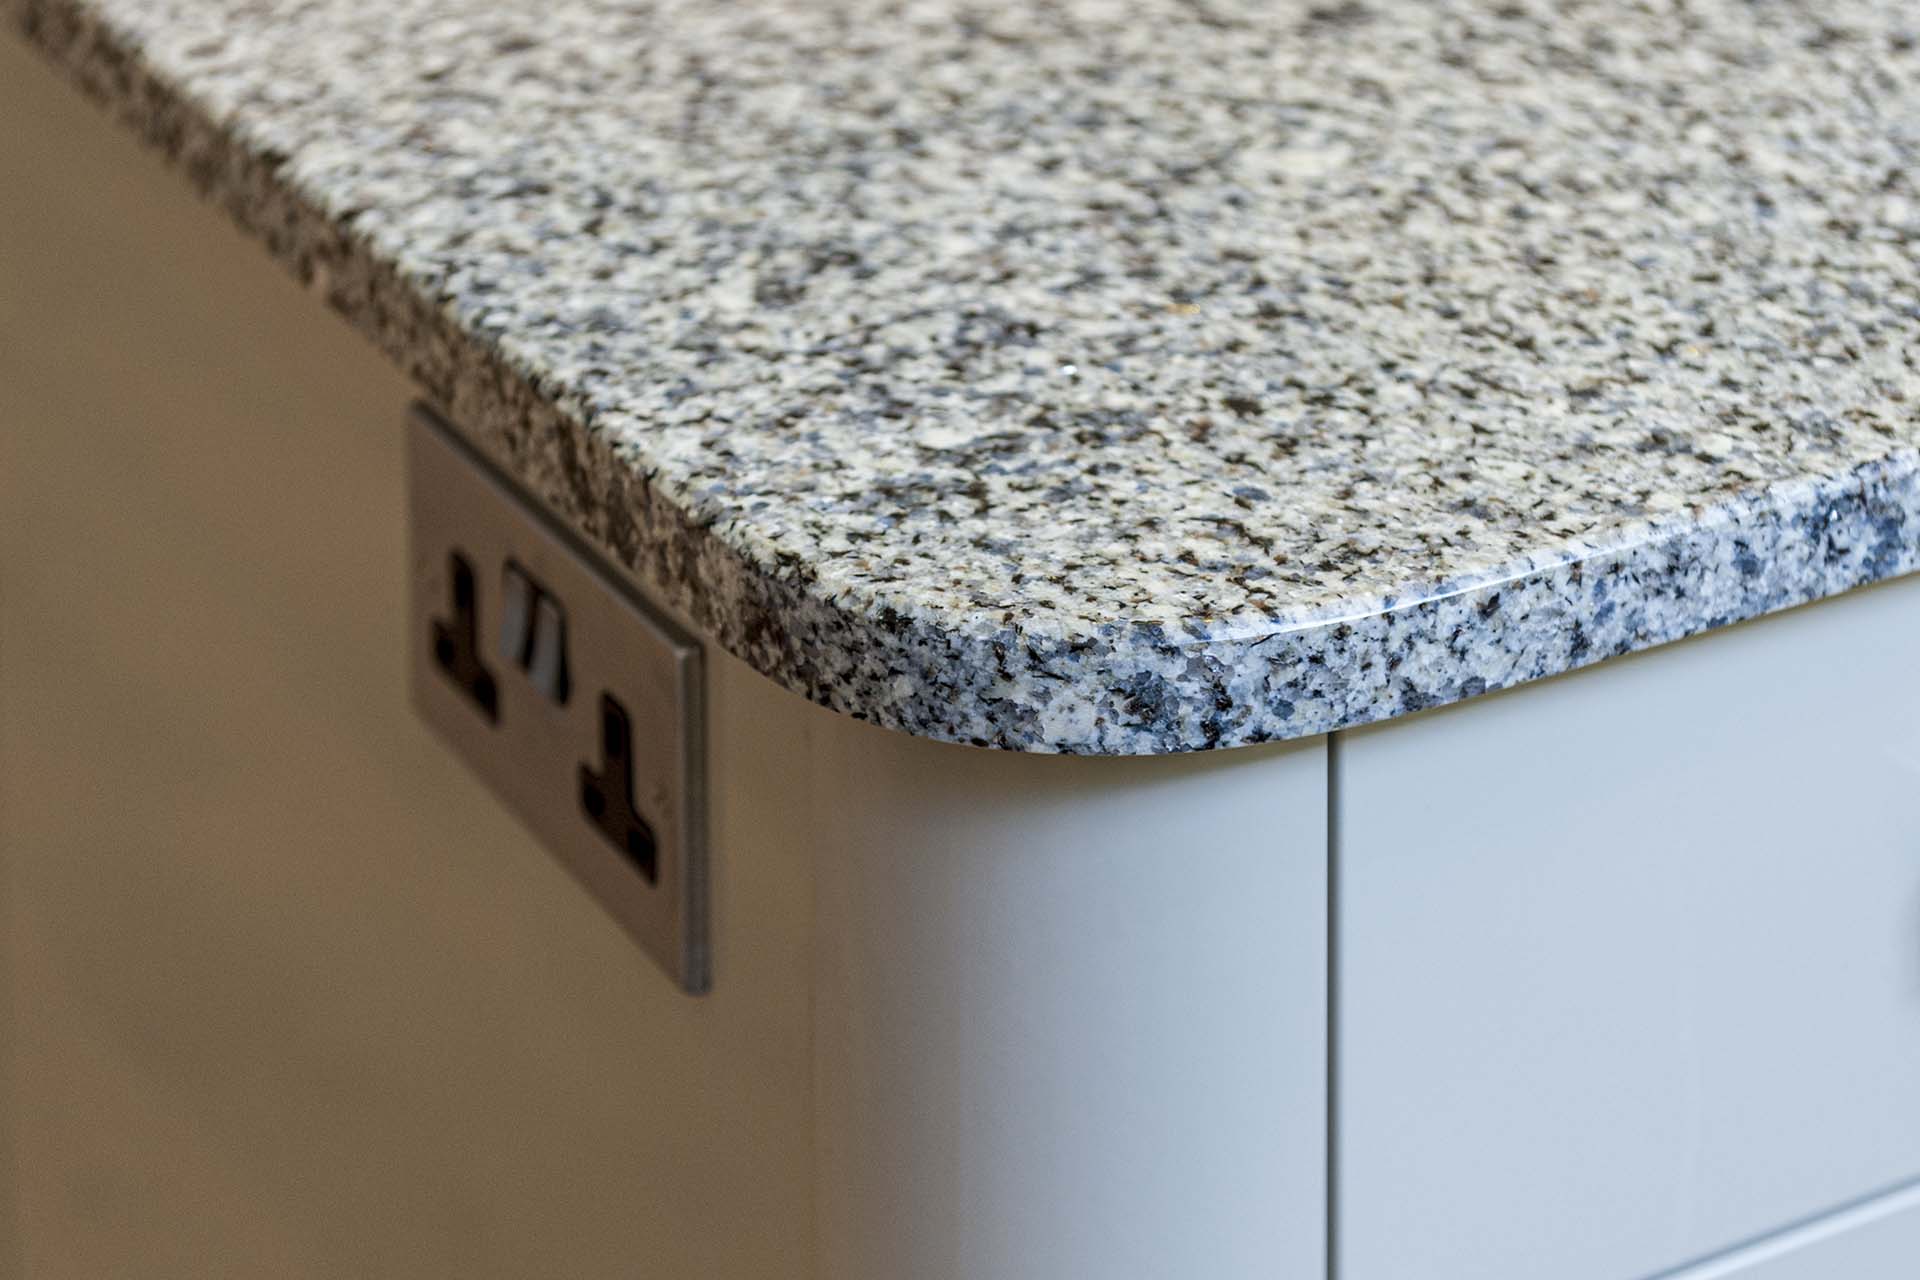 azul platino granite east grinstead 123213 curved corner over pilaster red